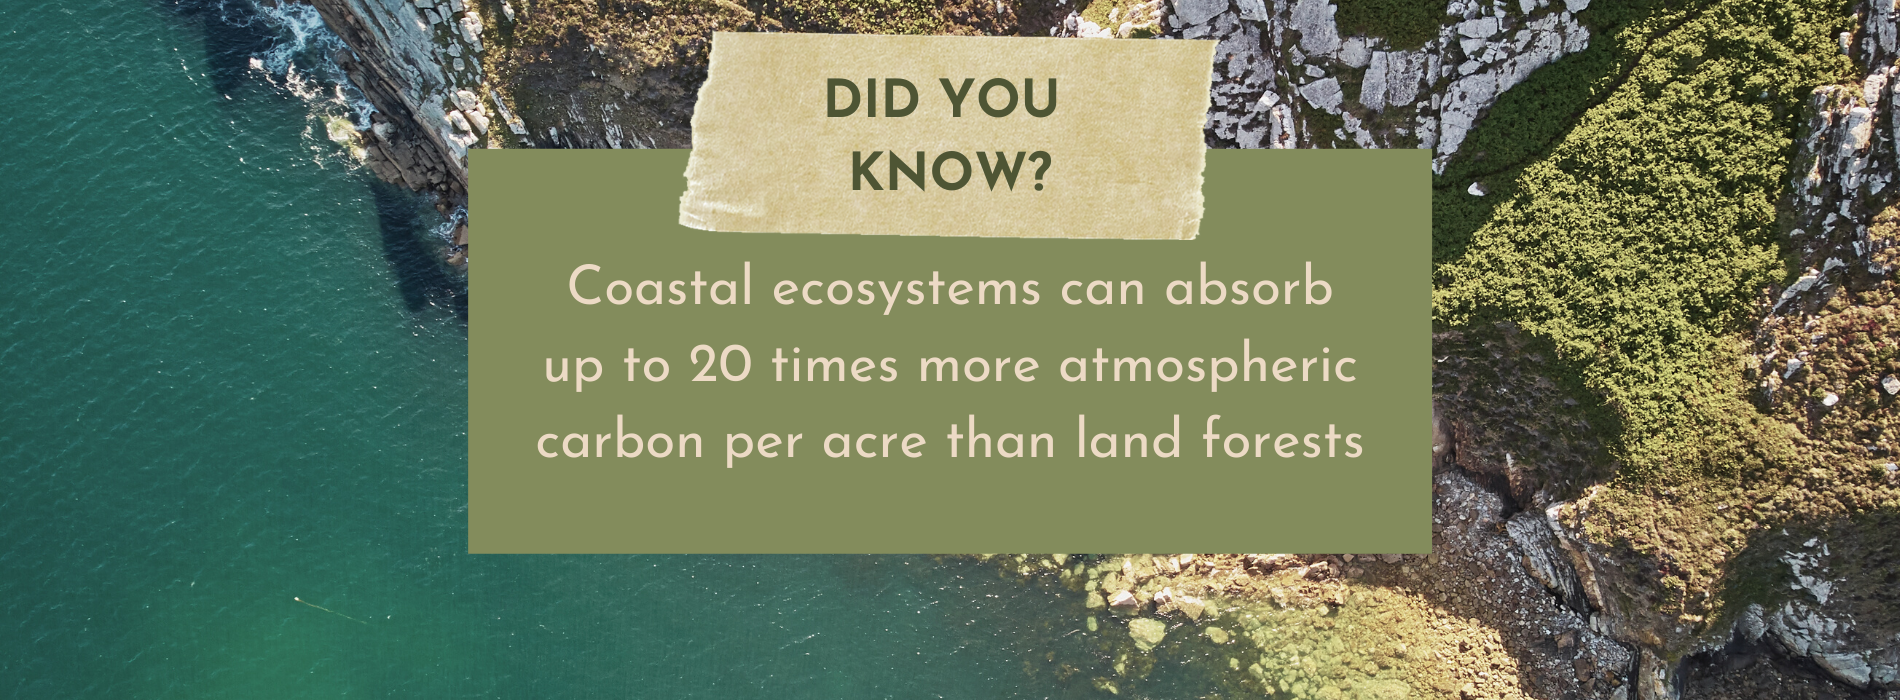 Did you know? Coastal ecosystems can absorb up to 20 times more atmospheric carbon per acre than land forests